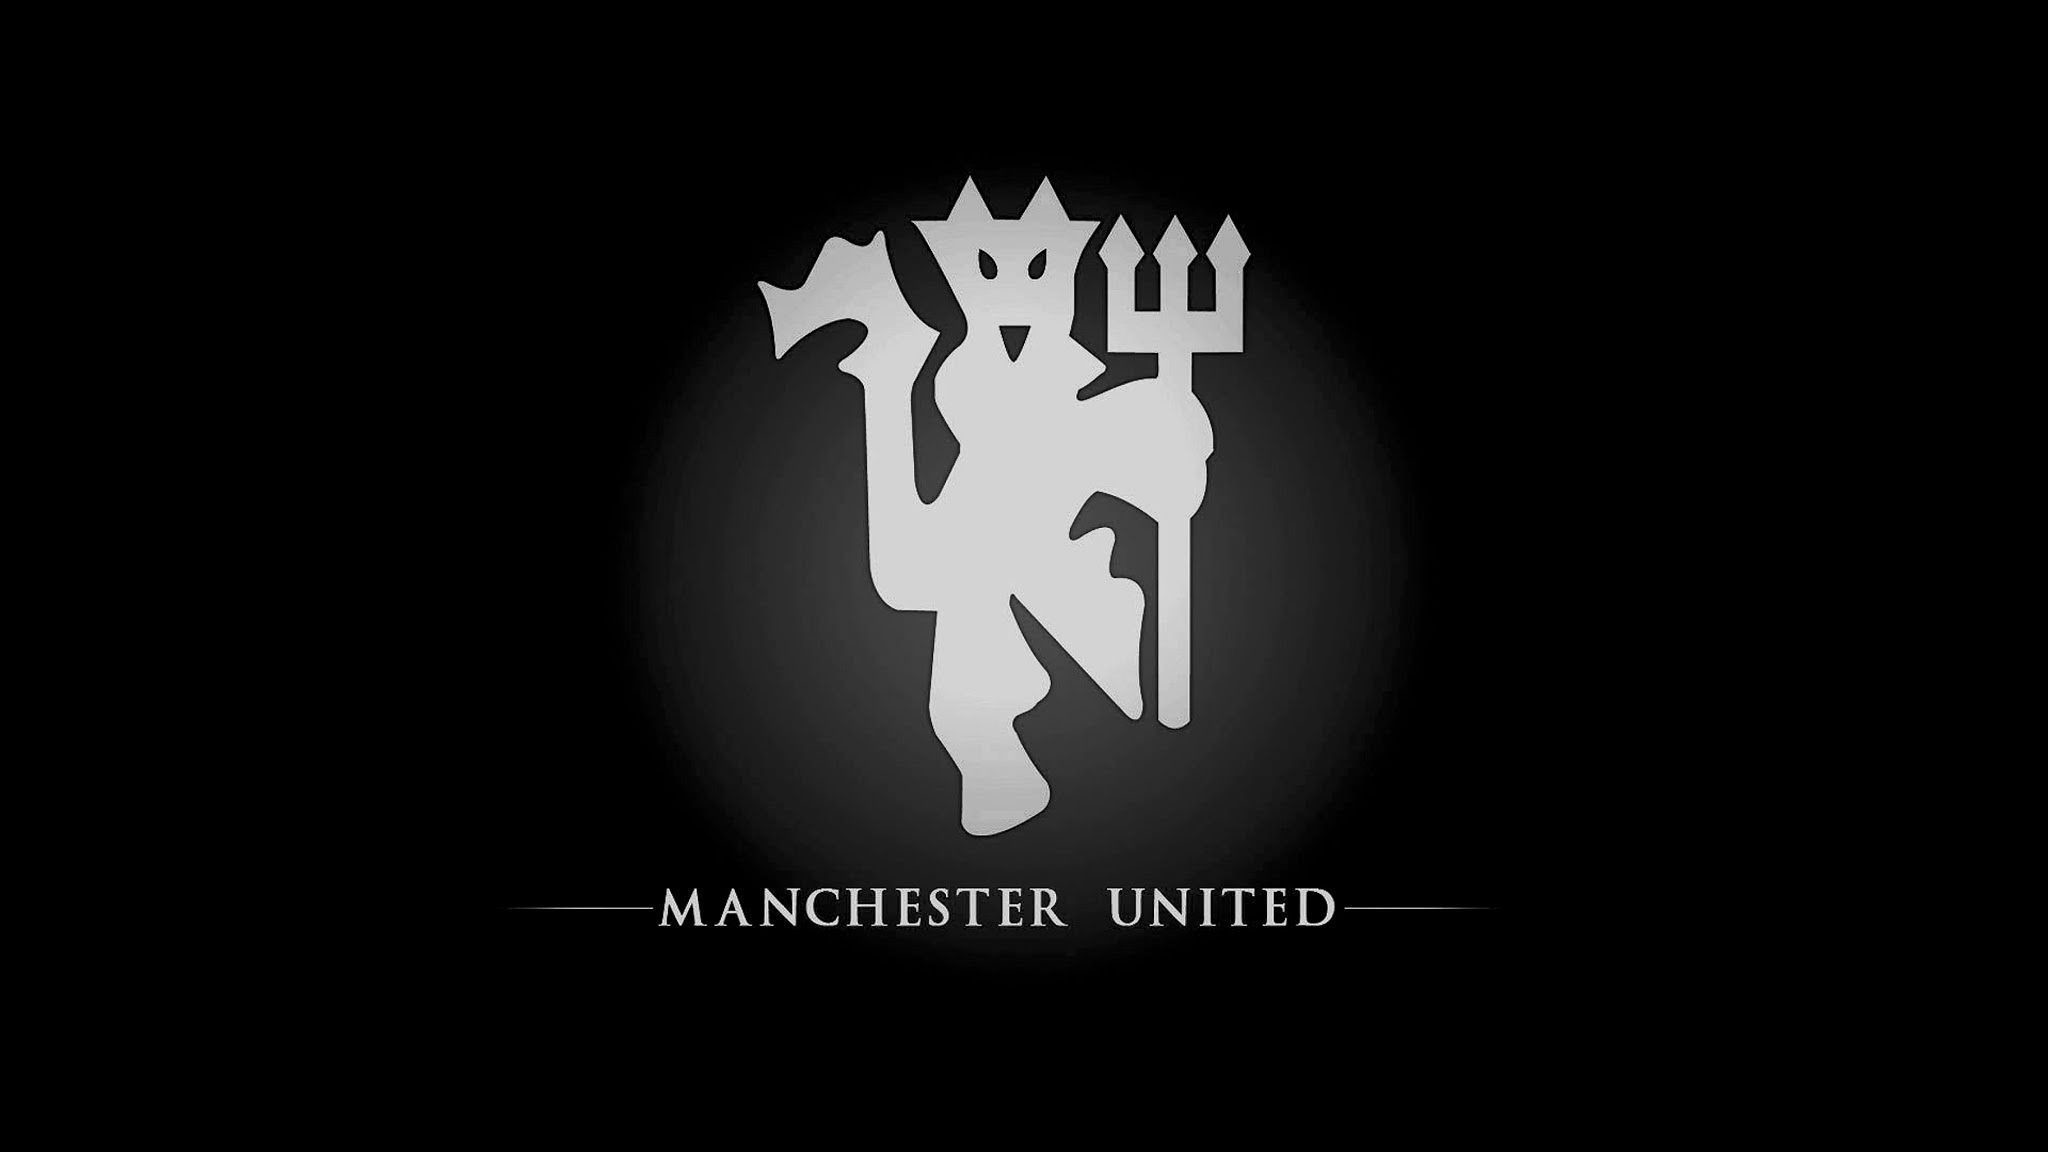 Wallpaper Manchester United 41 Wallpapers